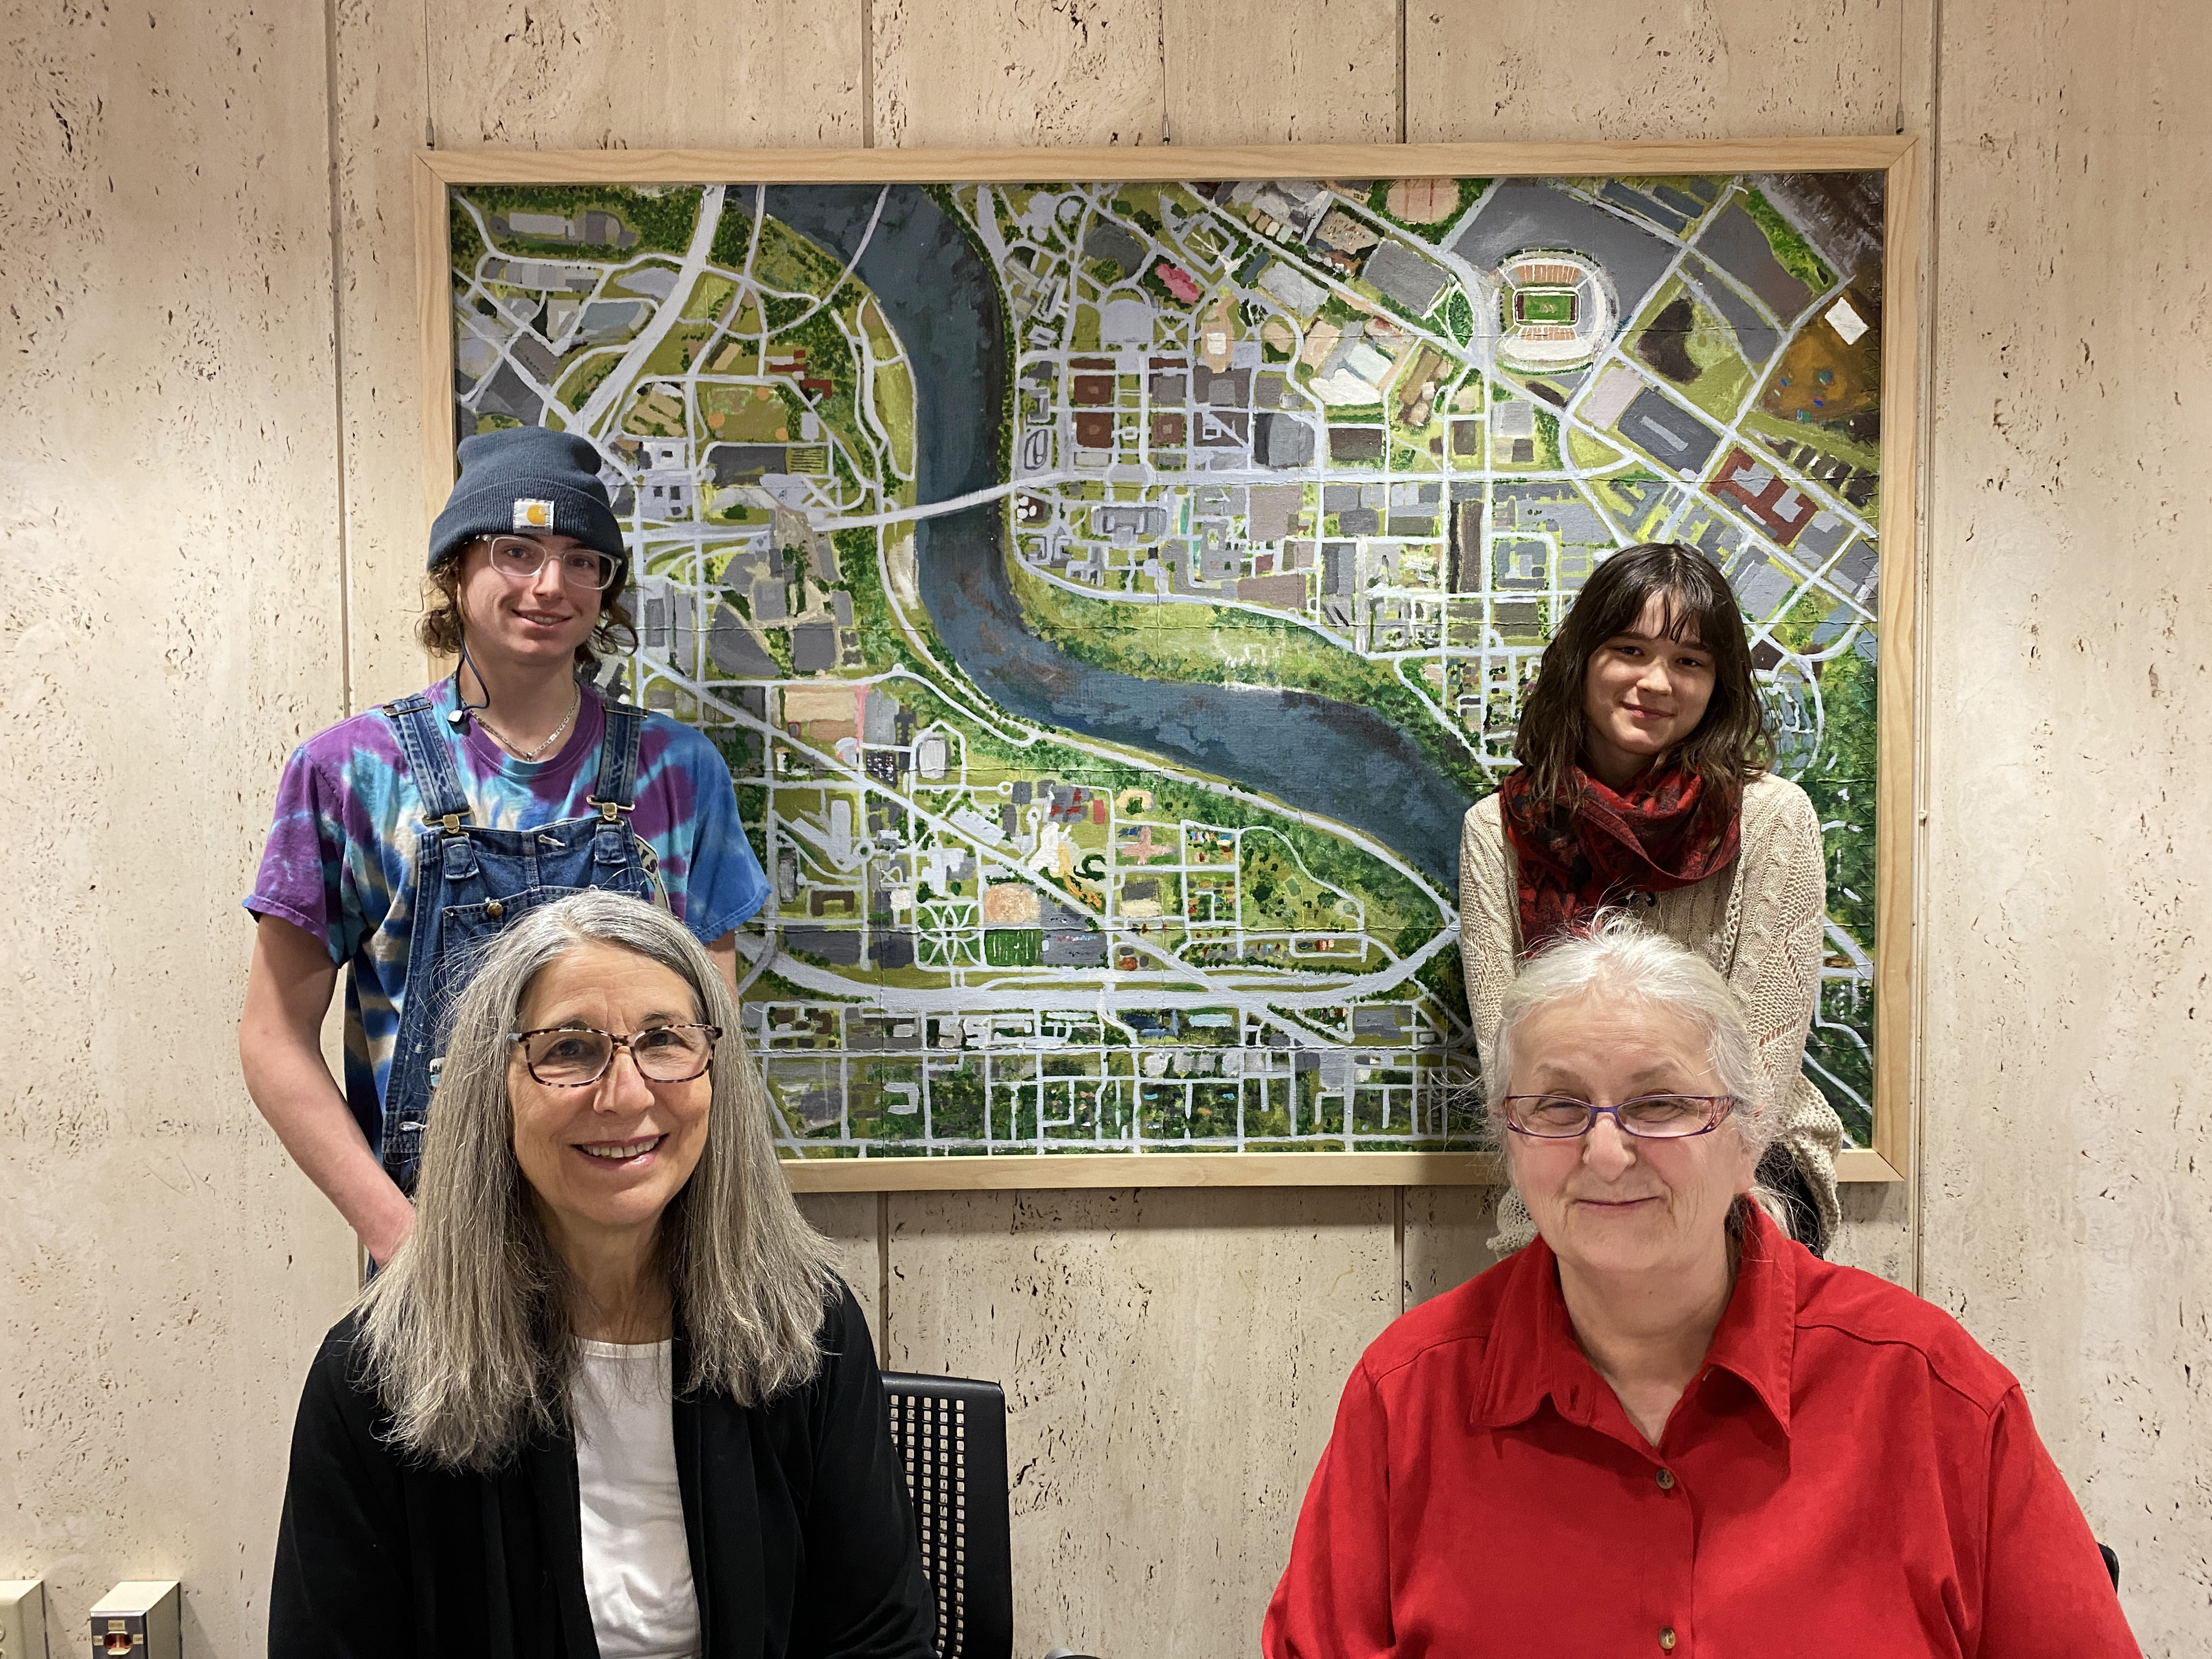 Four students stand and sit in front of a large framed map